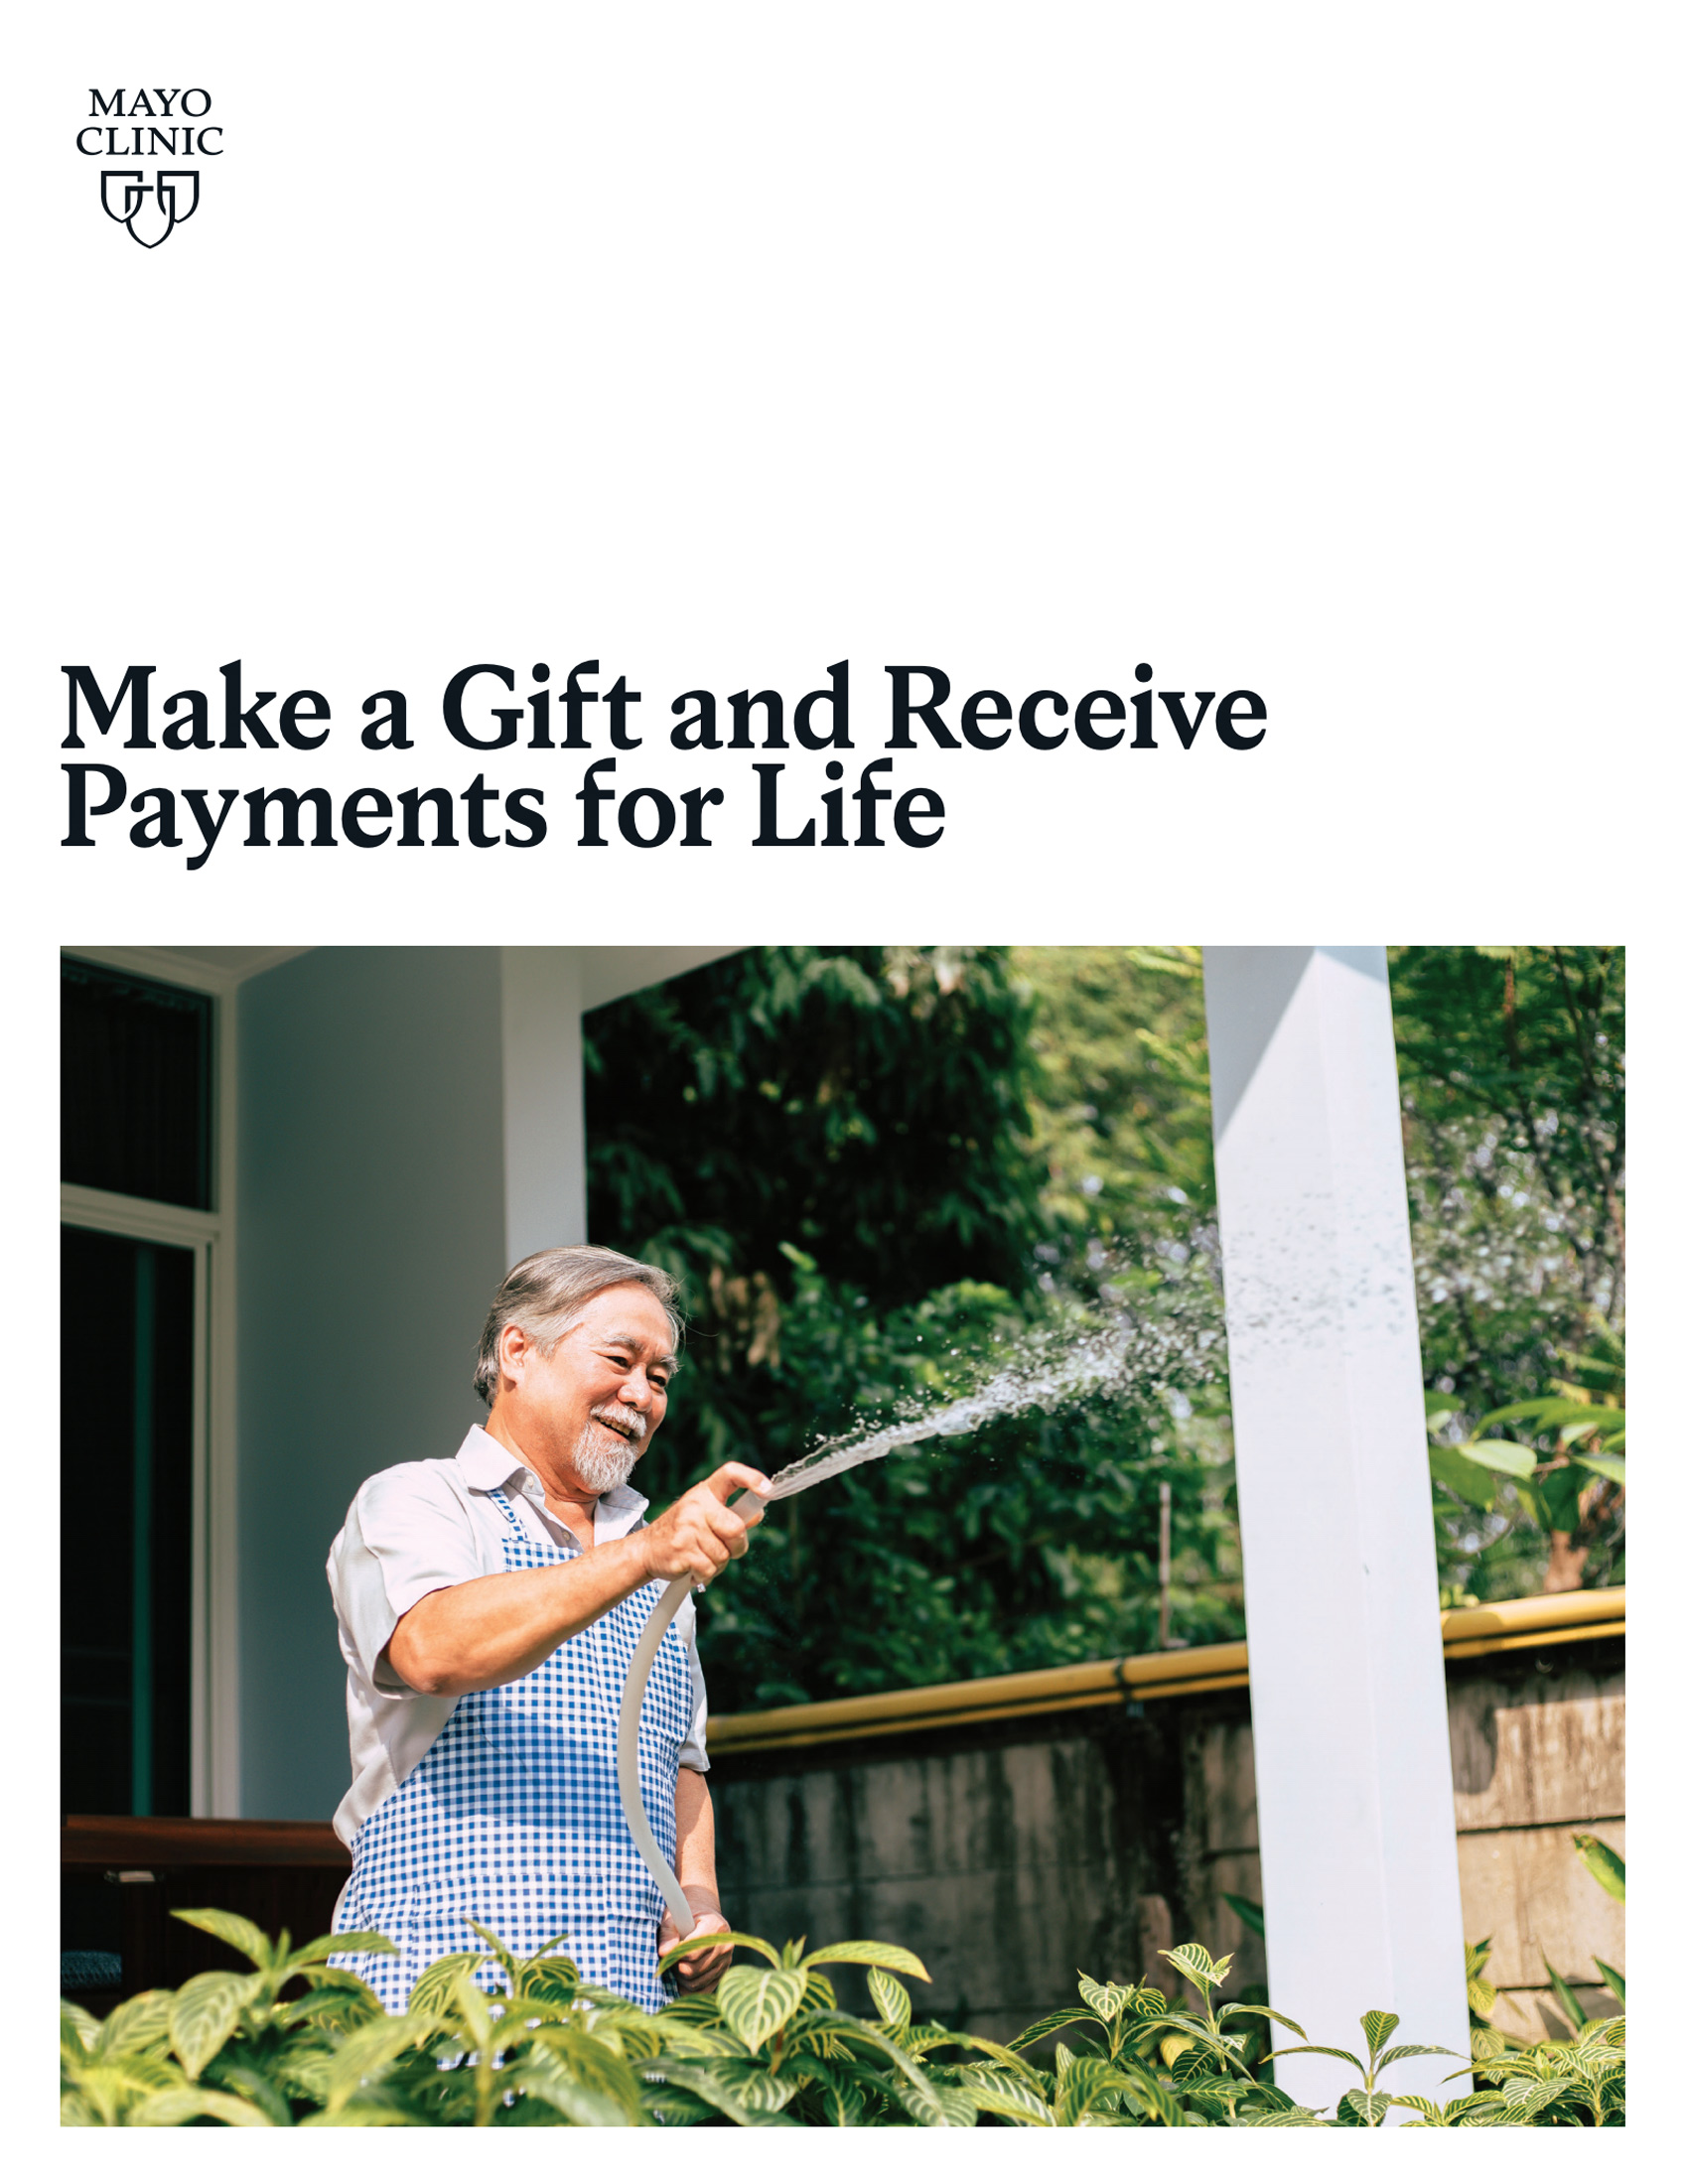 Make a Gift and Receive Payments for Life